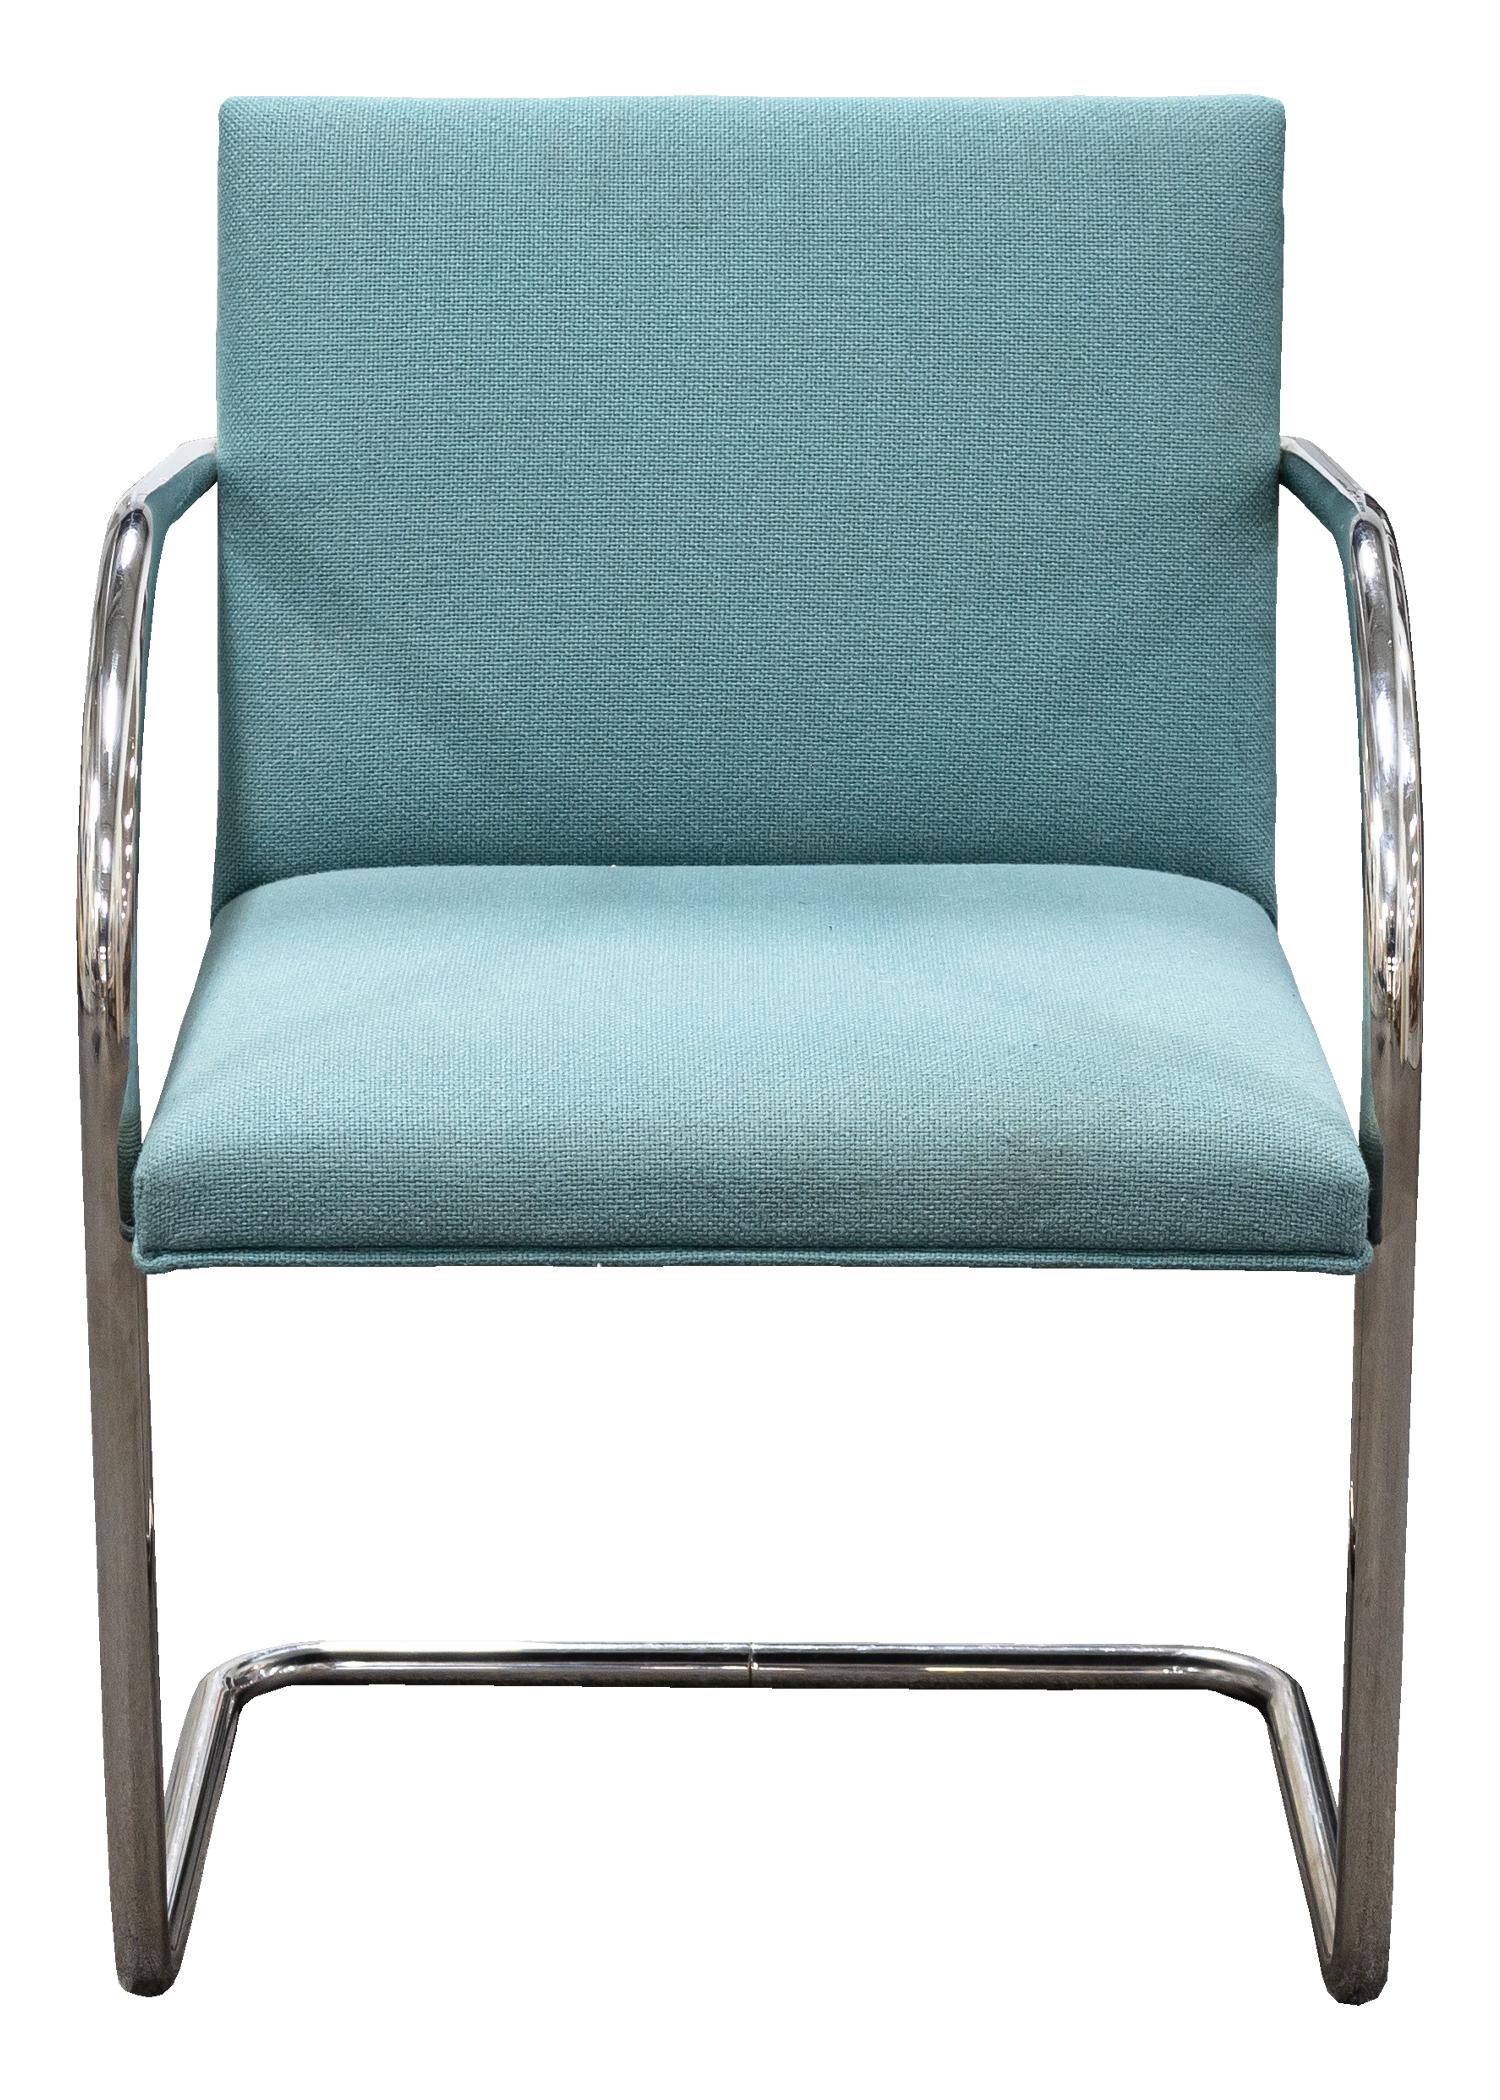 Thonet Set of 4 Tubular Steel Cantilever Modern Chairs Teal Upholstery Seating 6